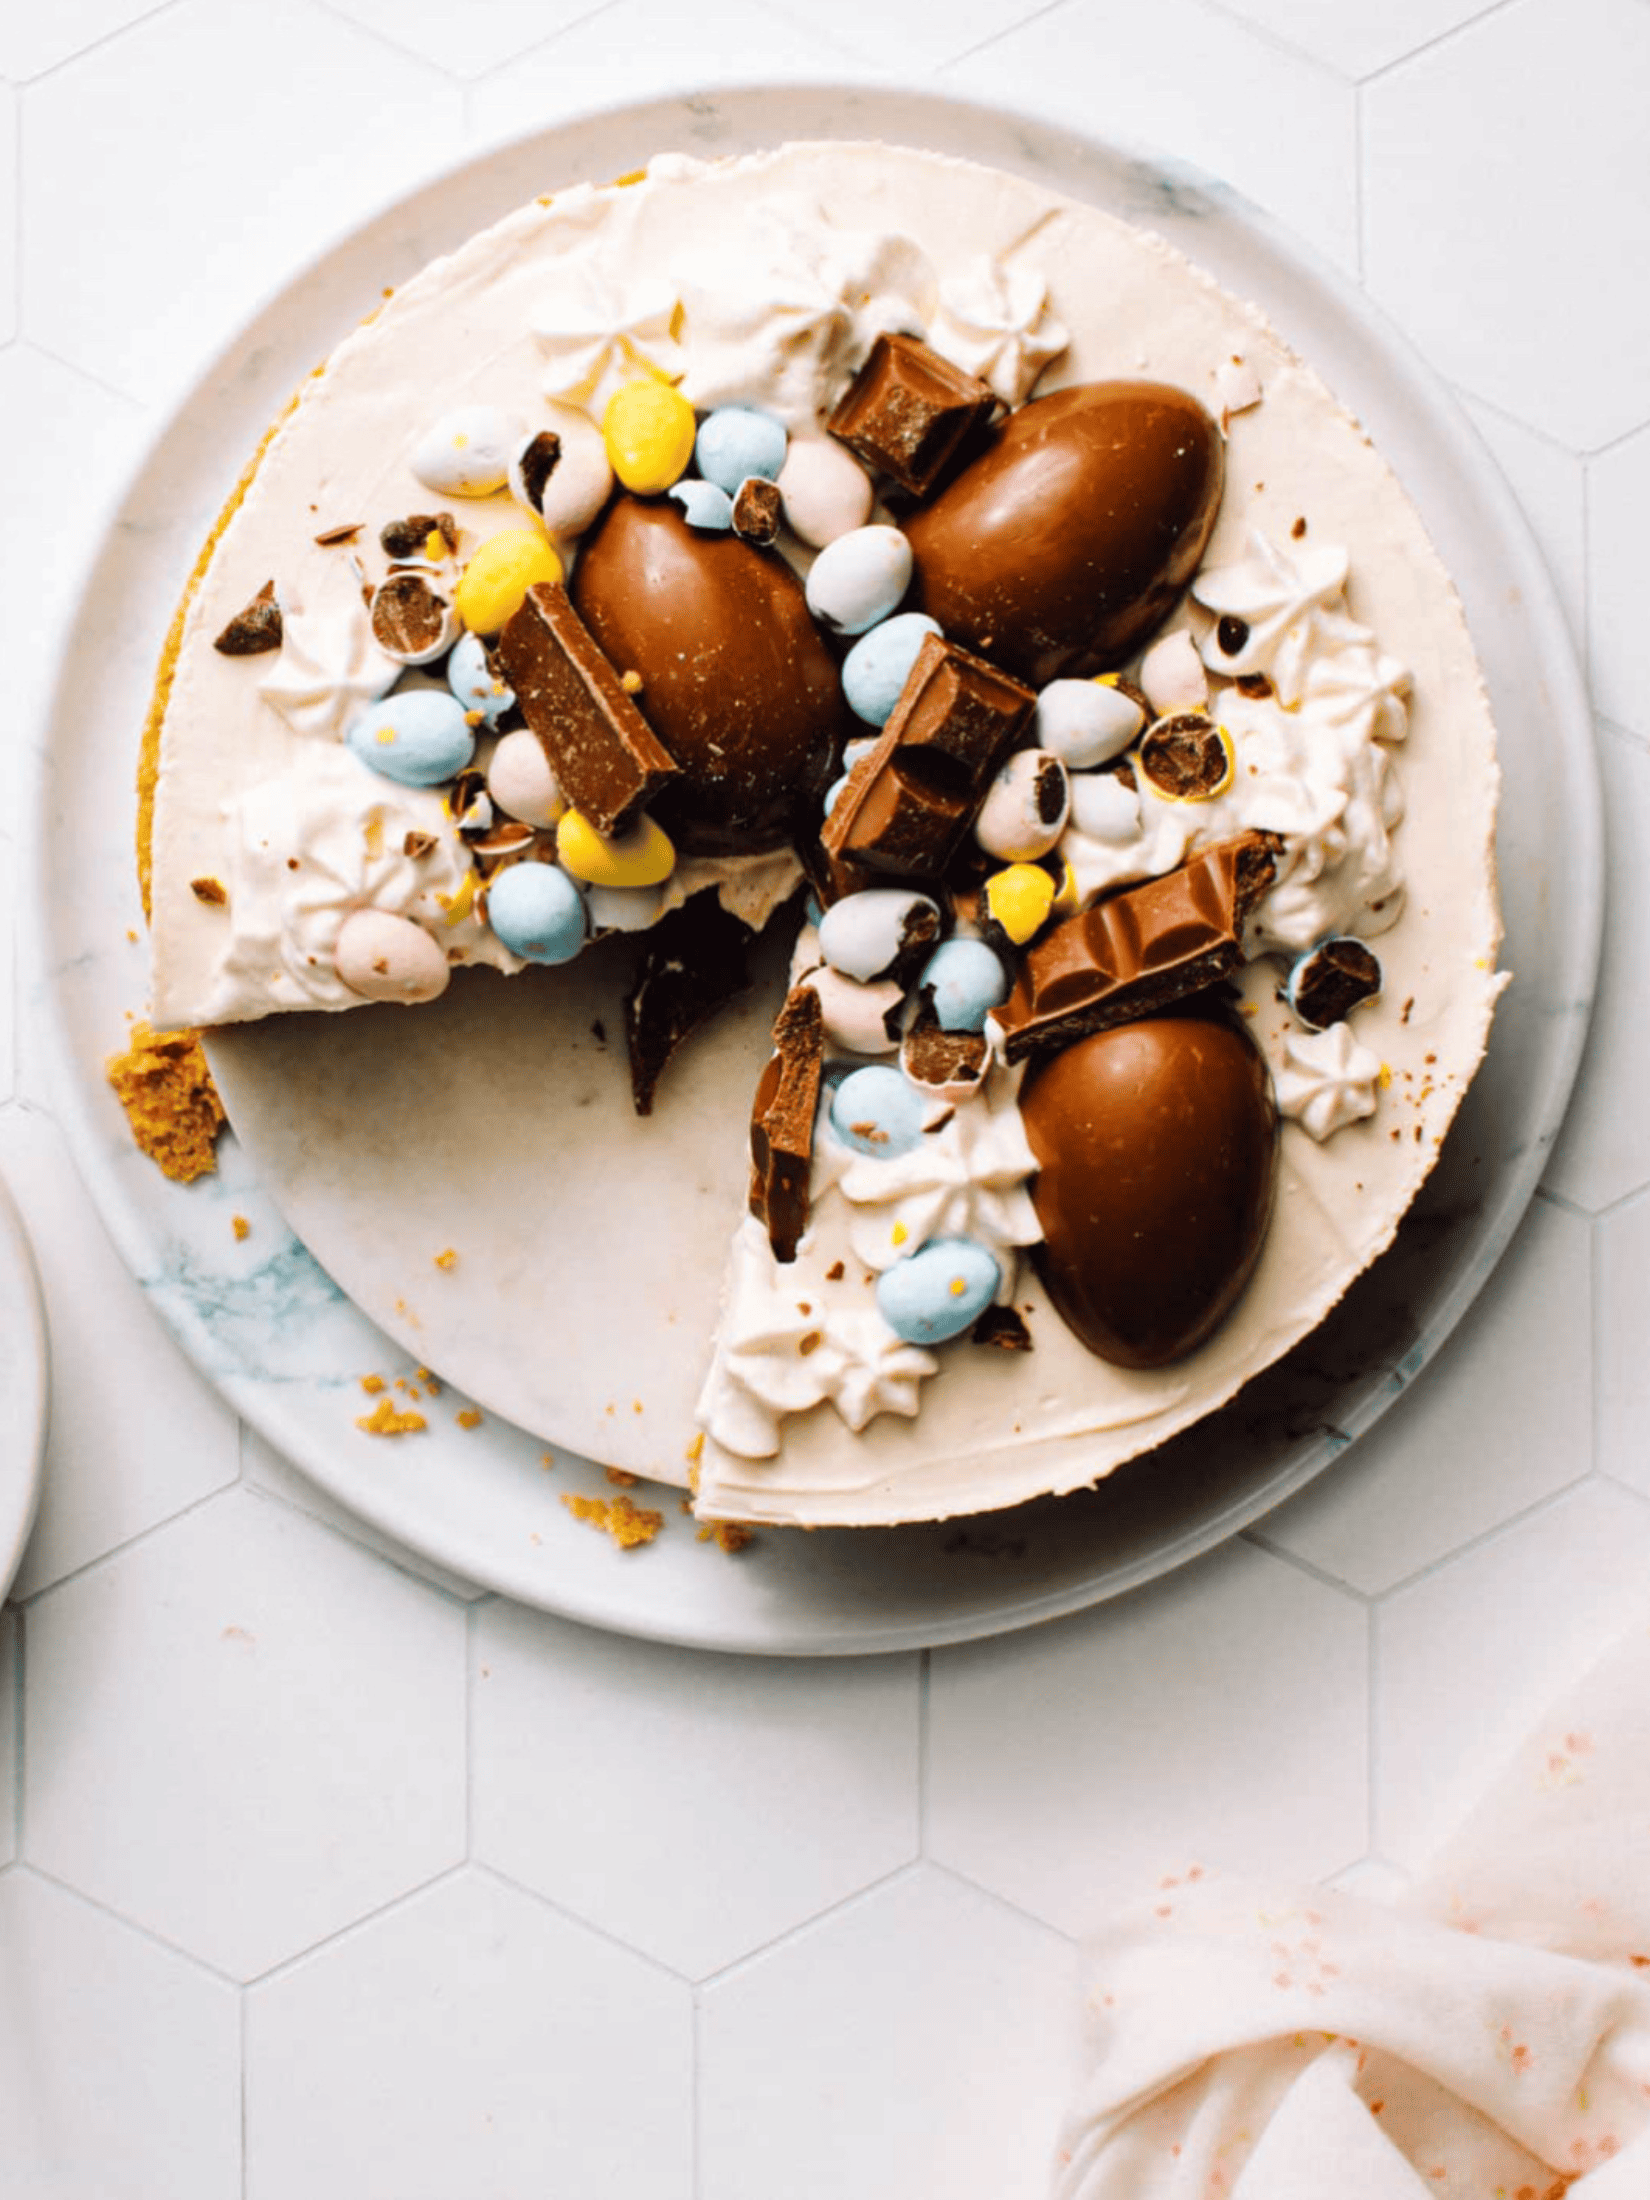 a delicious Easter-themed cheesecake adorned with colorful chocolate eggs and festive decorations on a plate.